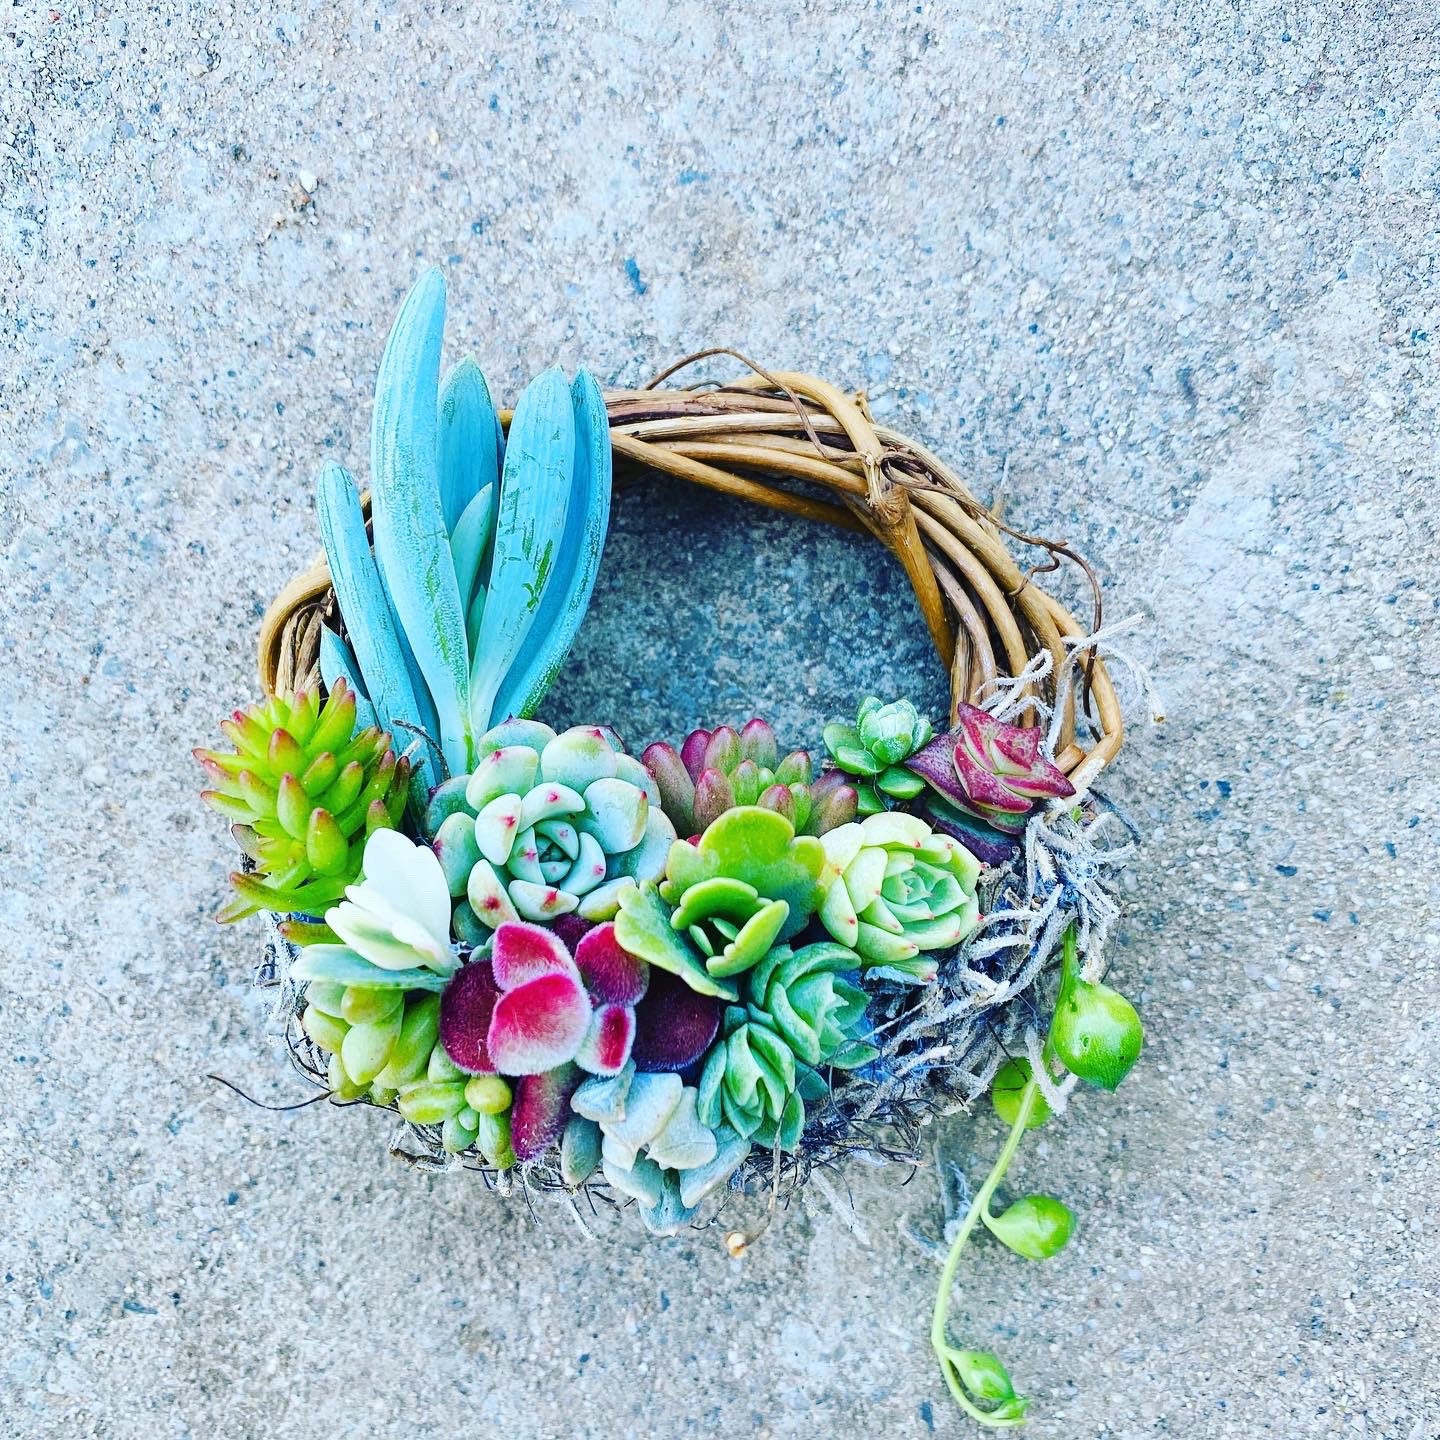 Valentine’s Day Gifts |Mini succulent wreath |wreaths |succulent |succulent arrangement |succulent planters |succulents |gifts |birthday